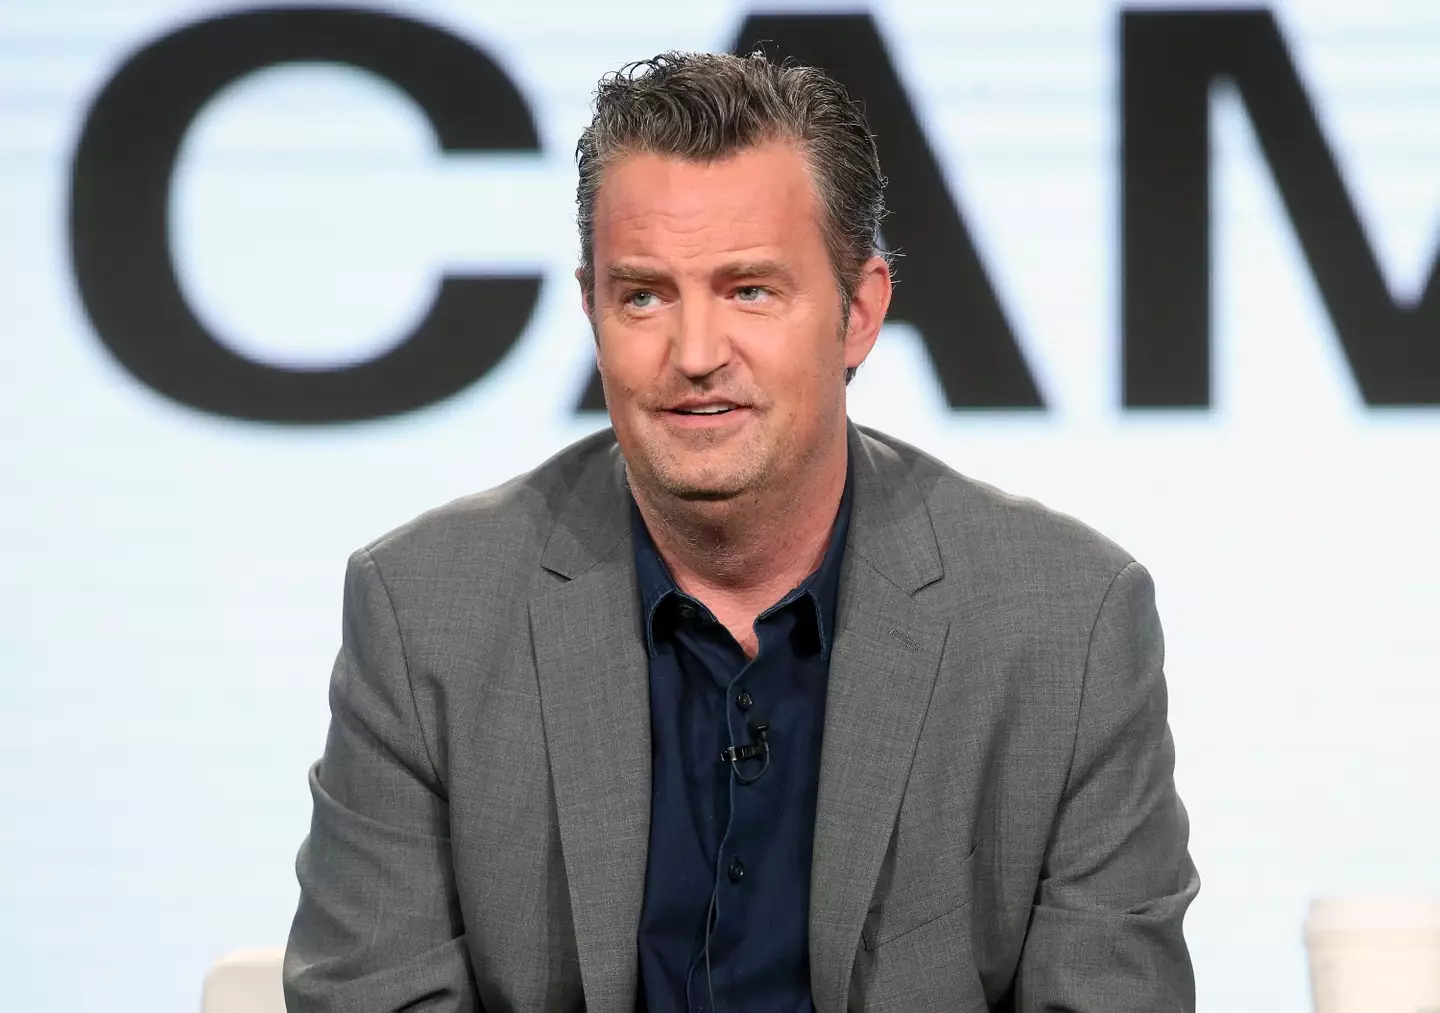 Matthew Perry died aged 54 last month.